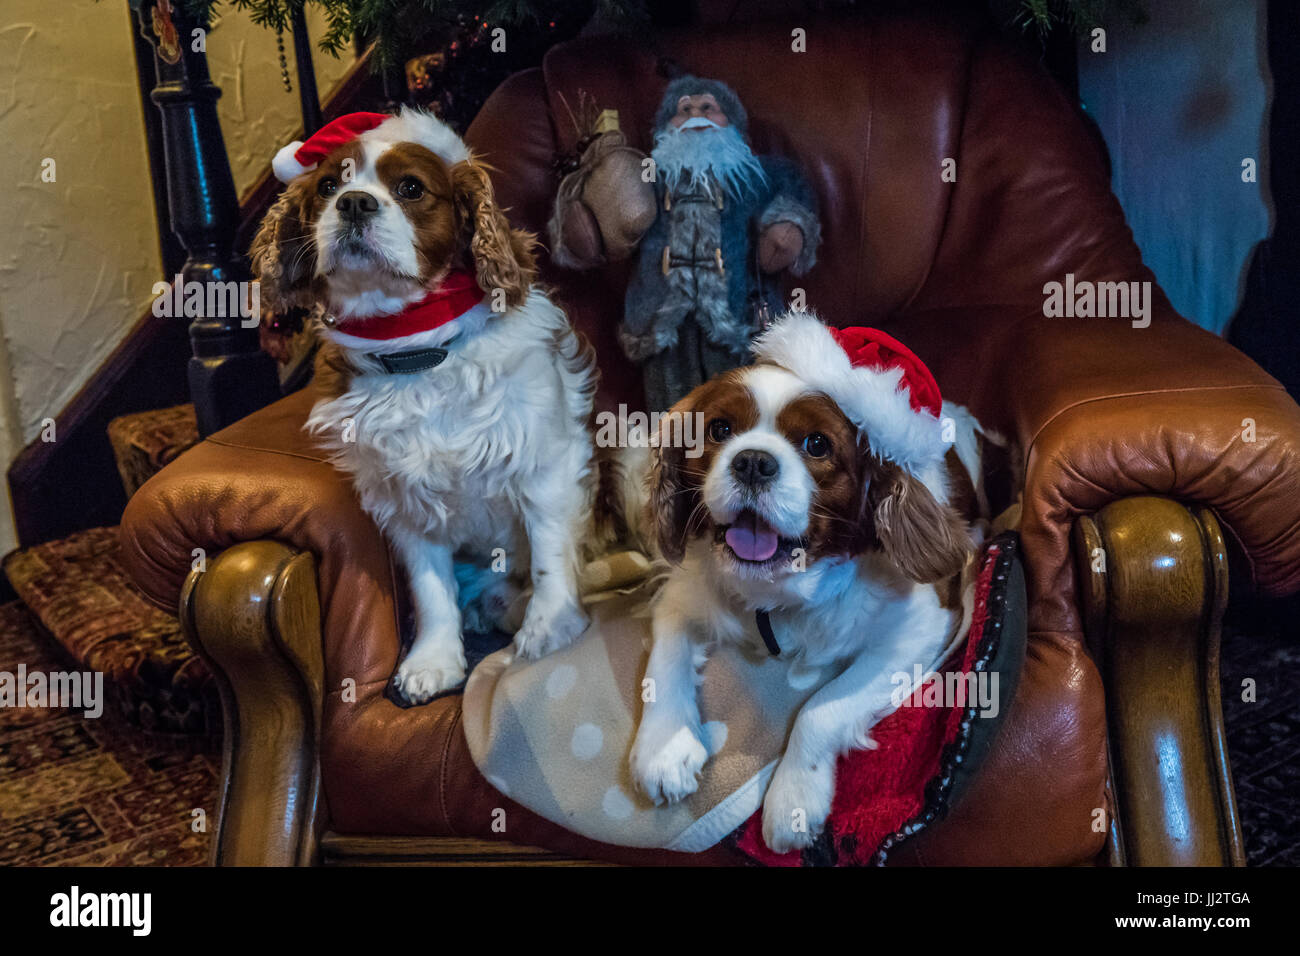 Cavalier King Charles Spaniels with Christmas hats sitting under a Christmas tree. Stock Photo